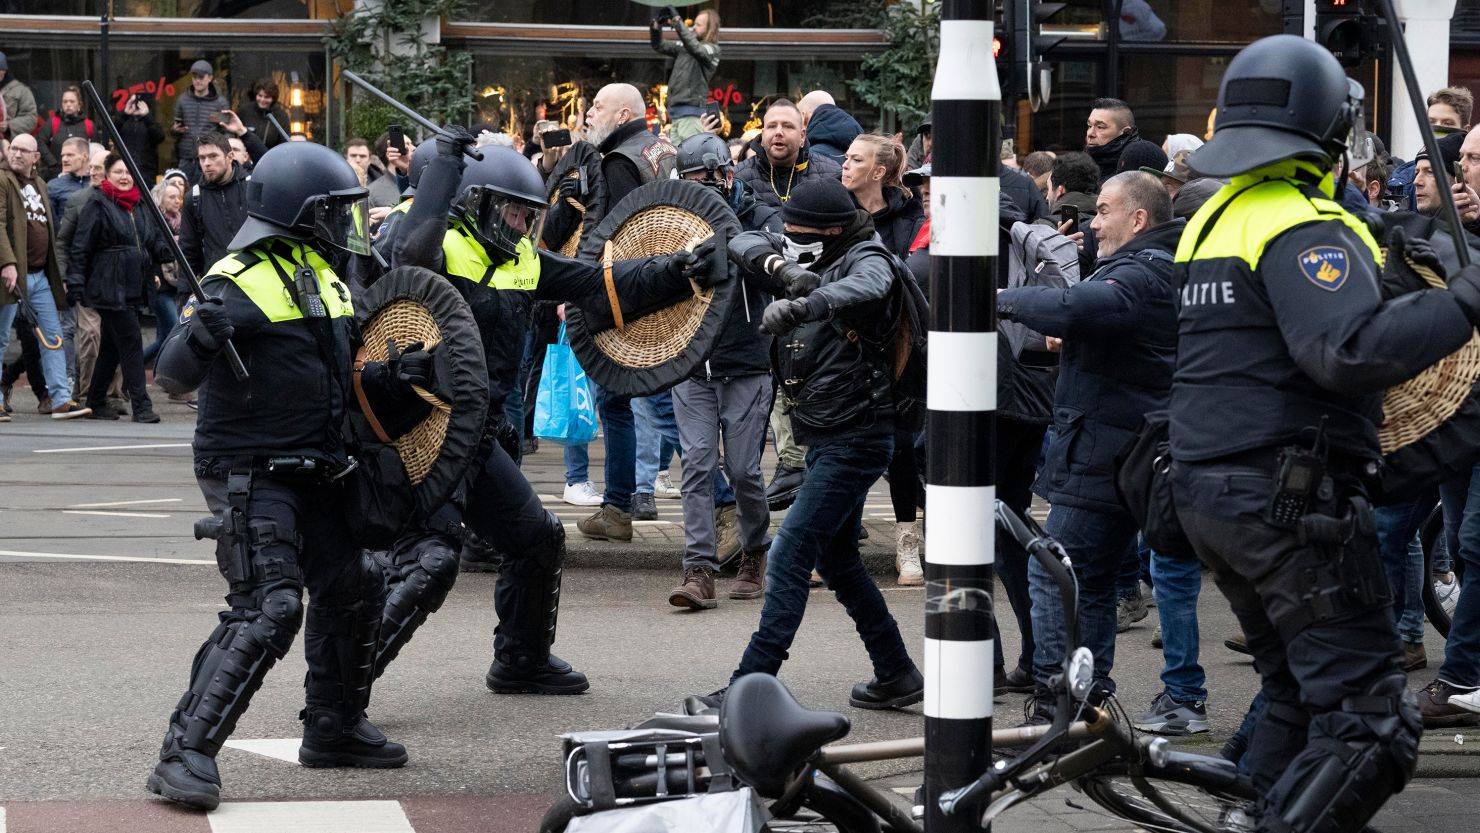 Police clash with demonstrators in Amsterdam, who were protesting the Dutch government's Covid-19 lockdown measures 